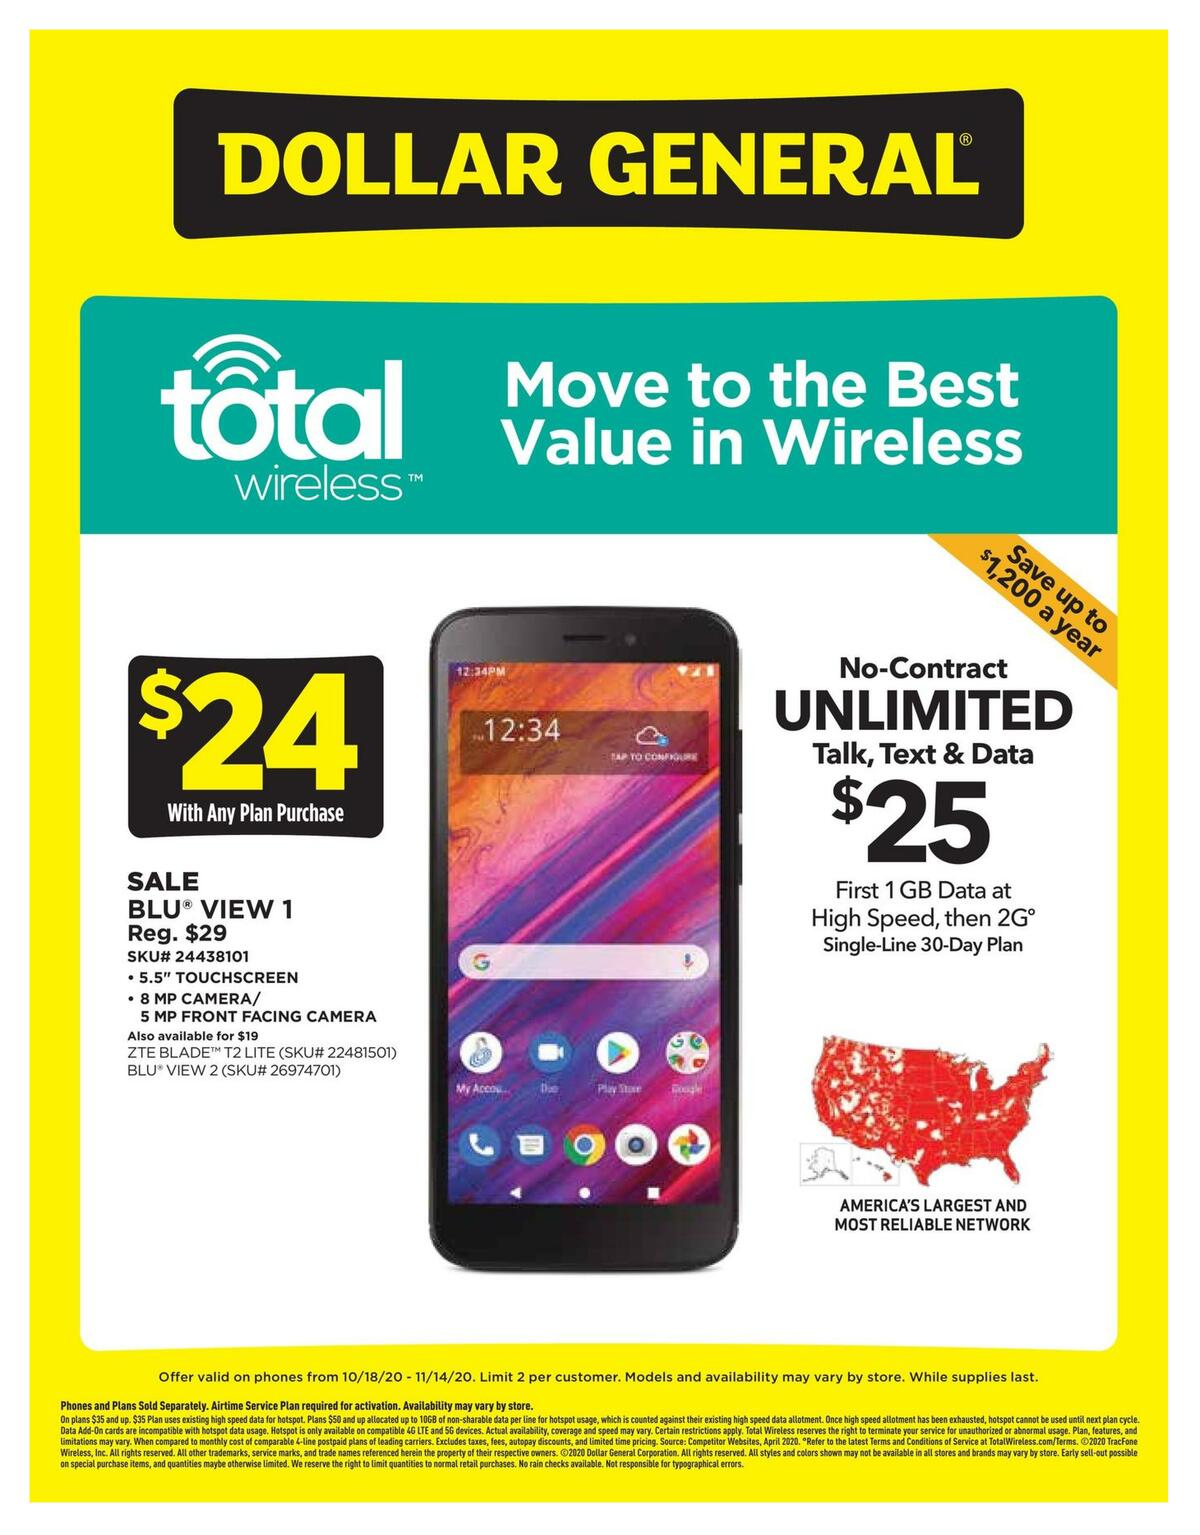 Dollar General Weekly Wireless Specials Weekly Ad from October 18